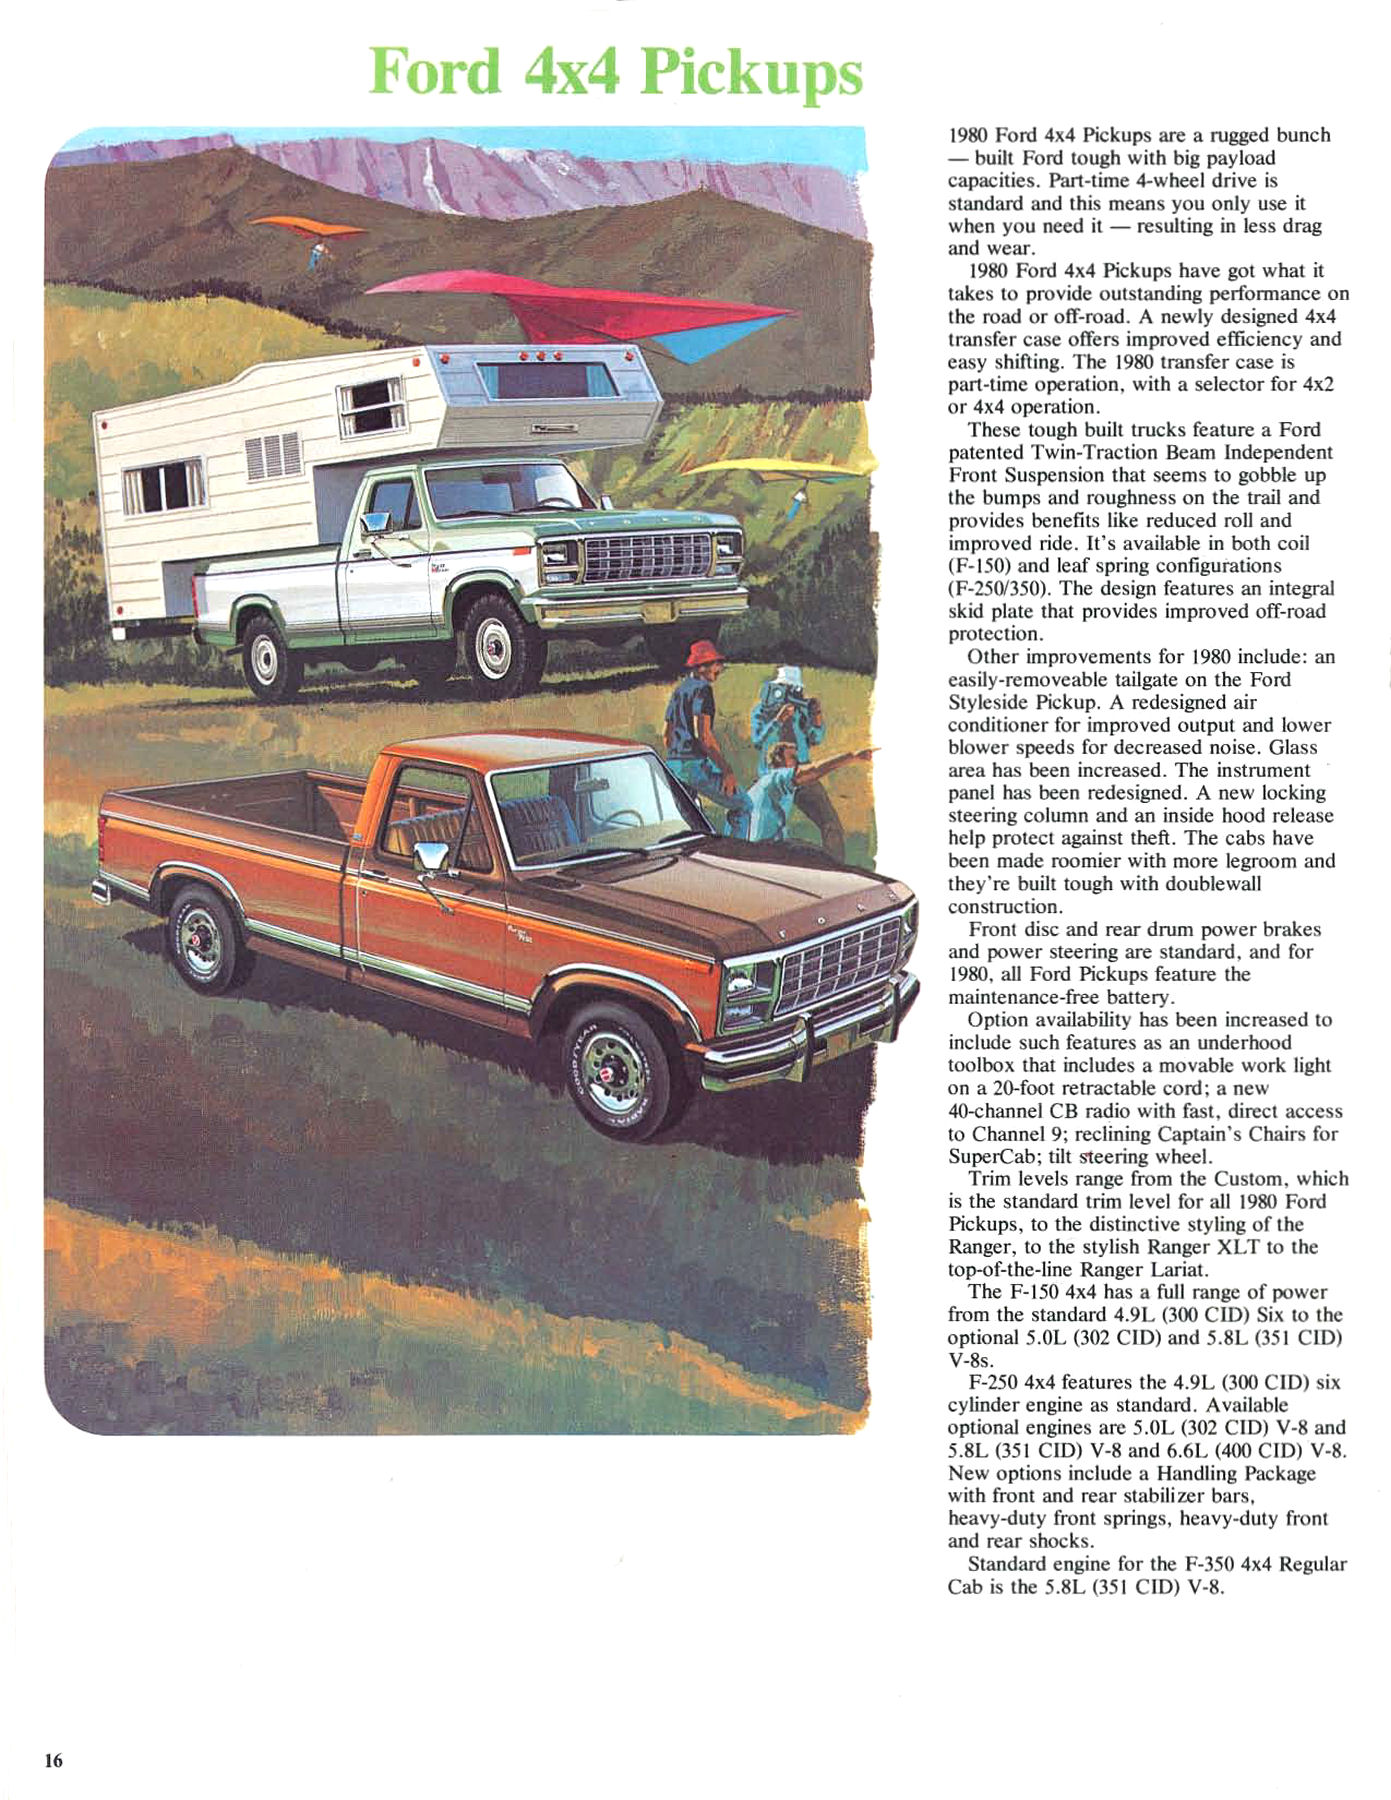 1980 Ford Recreation Vehicles-16